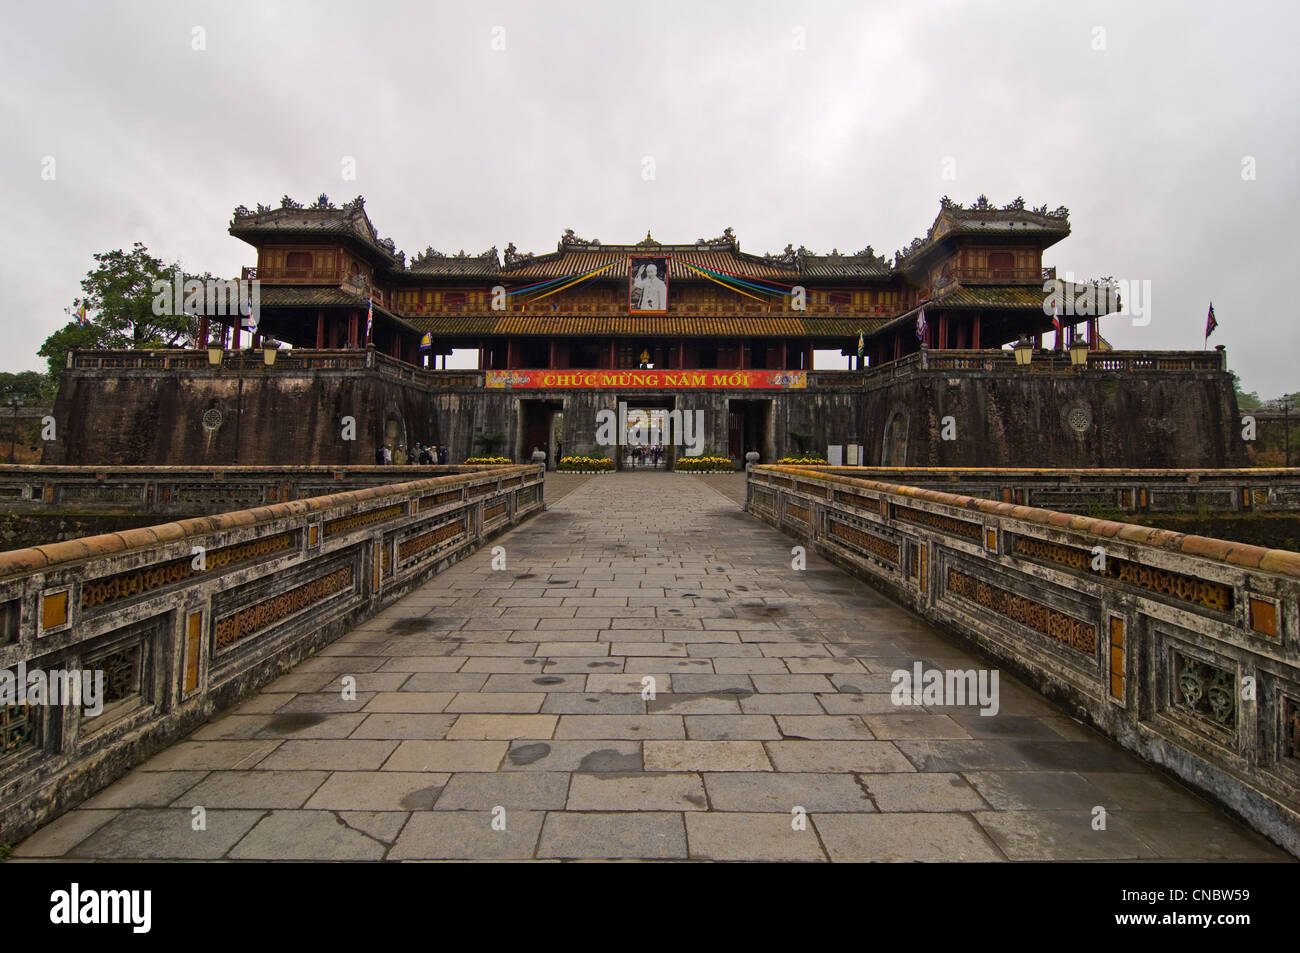 Horizontal wide angle of the Imperial Palace's [Kinh thành Huế] main entrance, the Noon or Midday Gate (Ngo Mon Gate) in Hue, Vietnam Stock Photo